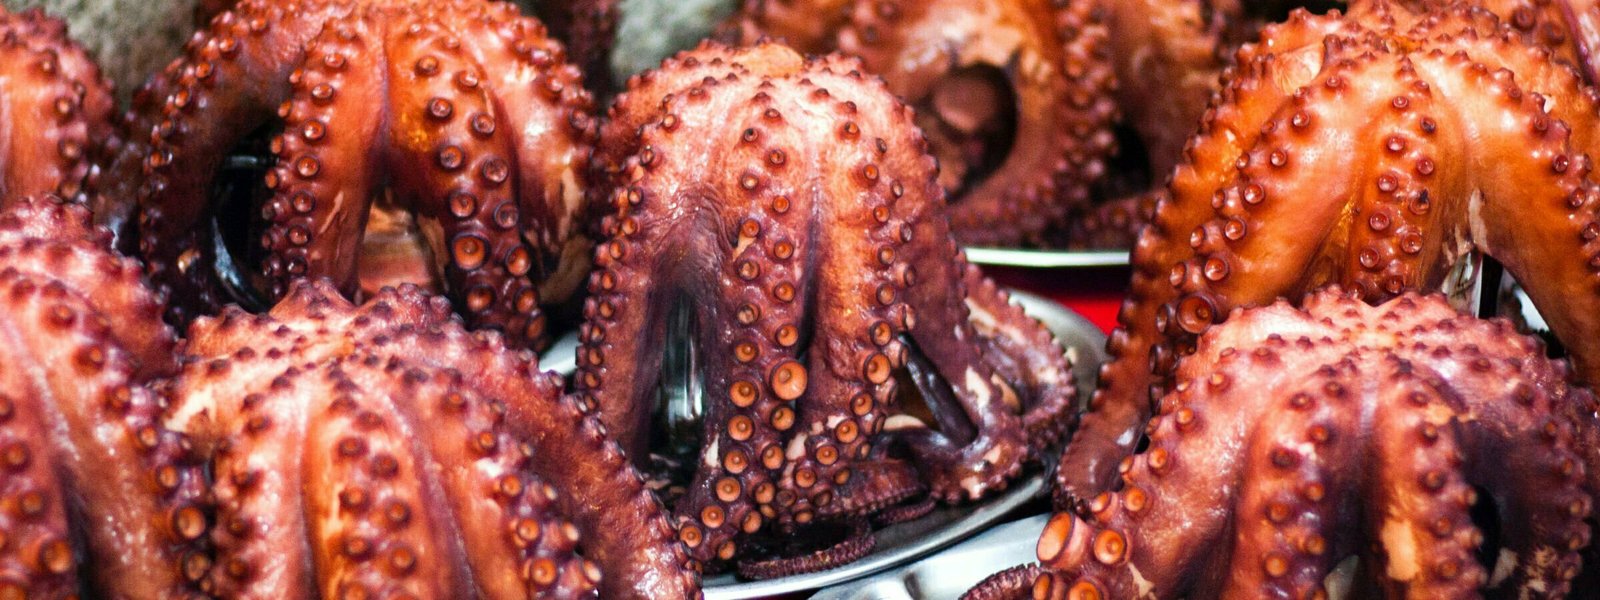 Several purple octopus sit upside down on a table exposing their tentacles. 